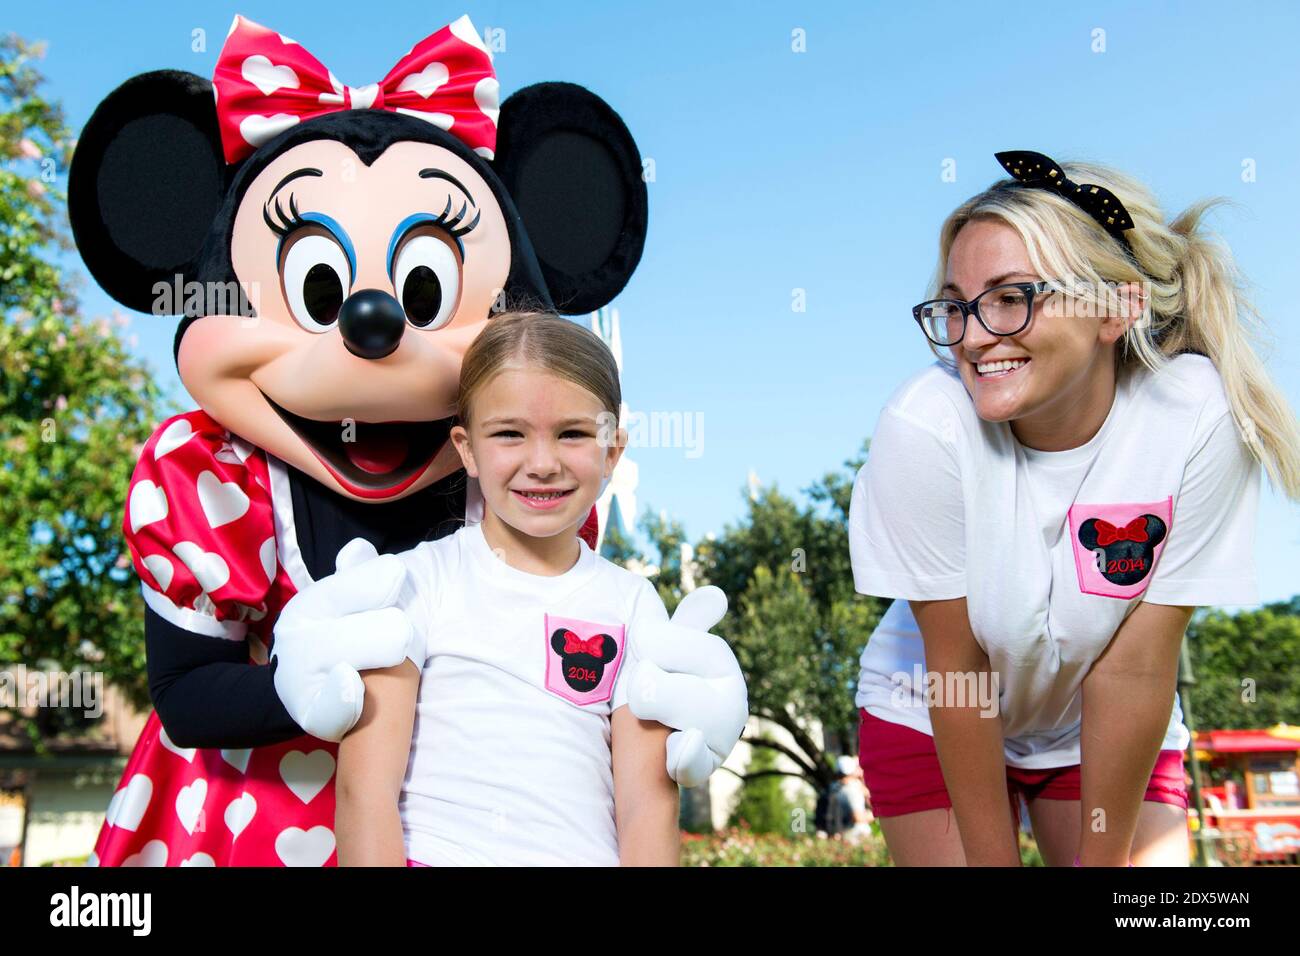 Actress and country music artist Jamie Lynn Spears poses with her husband, Jamie Watson, her six-year-old daughter Maddie and Minnie Mouse in front of Cinderella Castle at the Magic Kingdom park on Aug. 14, 2014 in Lake Buena Vista, Florida. Spears, the sister of pop superstar Britney Spears and former star of 'Zoey 101' on Nickelodeon, lives in Nashville, Tenn and is currently on tour to support her first country music single. Her sister Britney launched her career at Walt Disney World, starring in 'The All-New Mickey Mouse Club' that taped at Disney's Hollywood Studios theme park. Photo by C Stock Photo